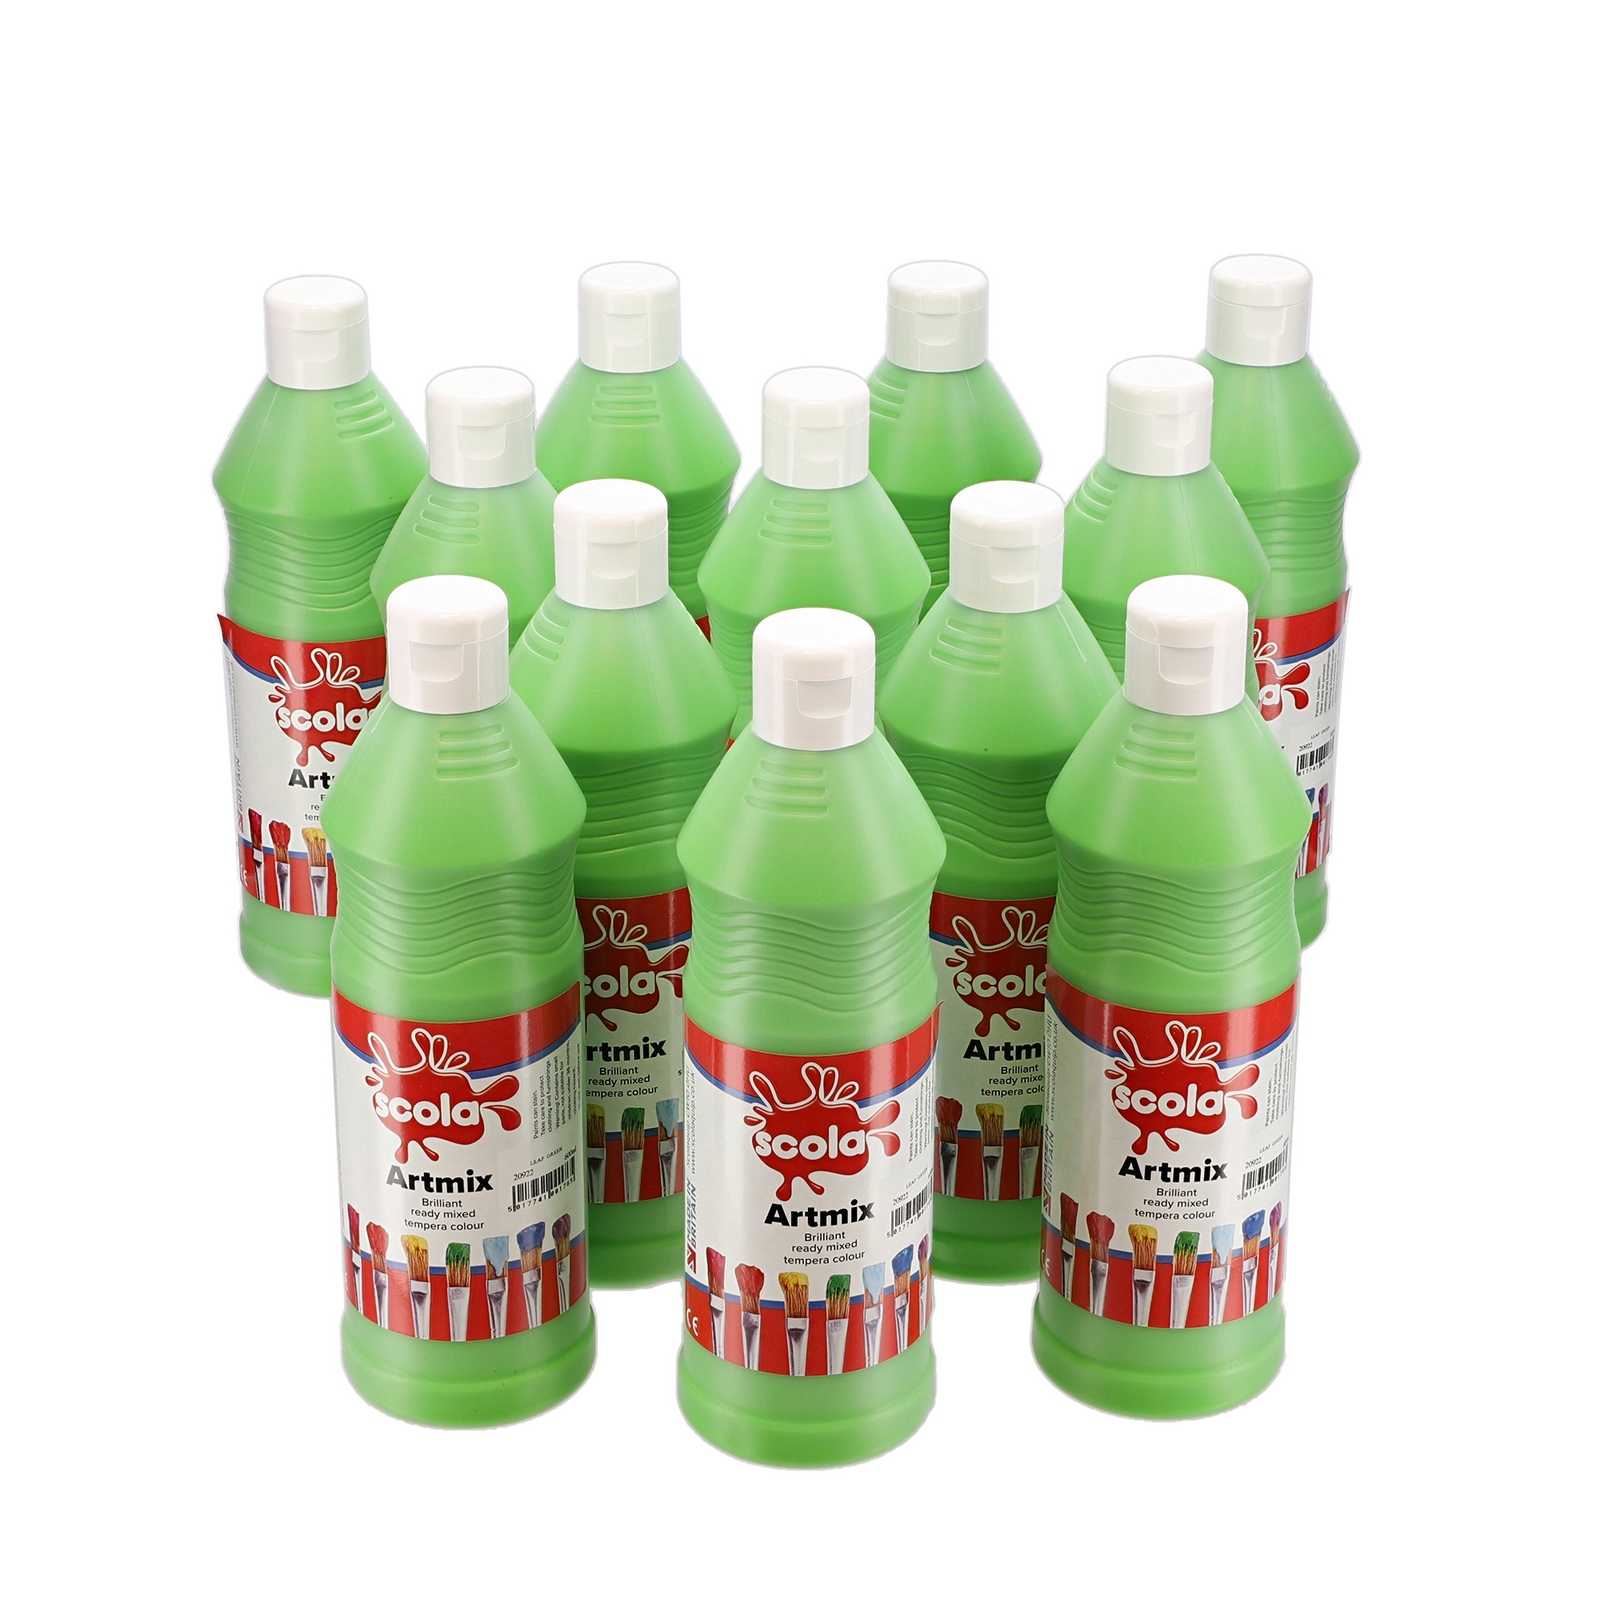 Scola  Leaf Green Artmix Ready Mixed Paint - 600ml - Pack of 12